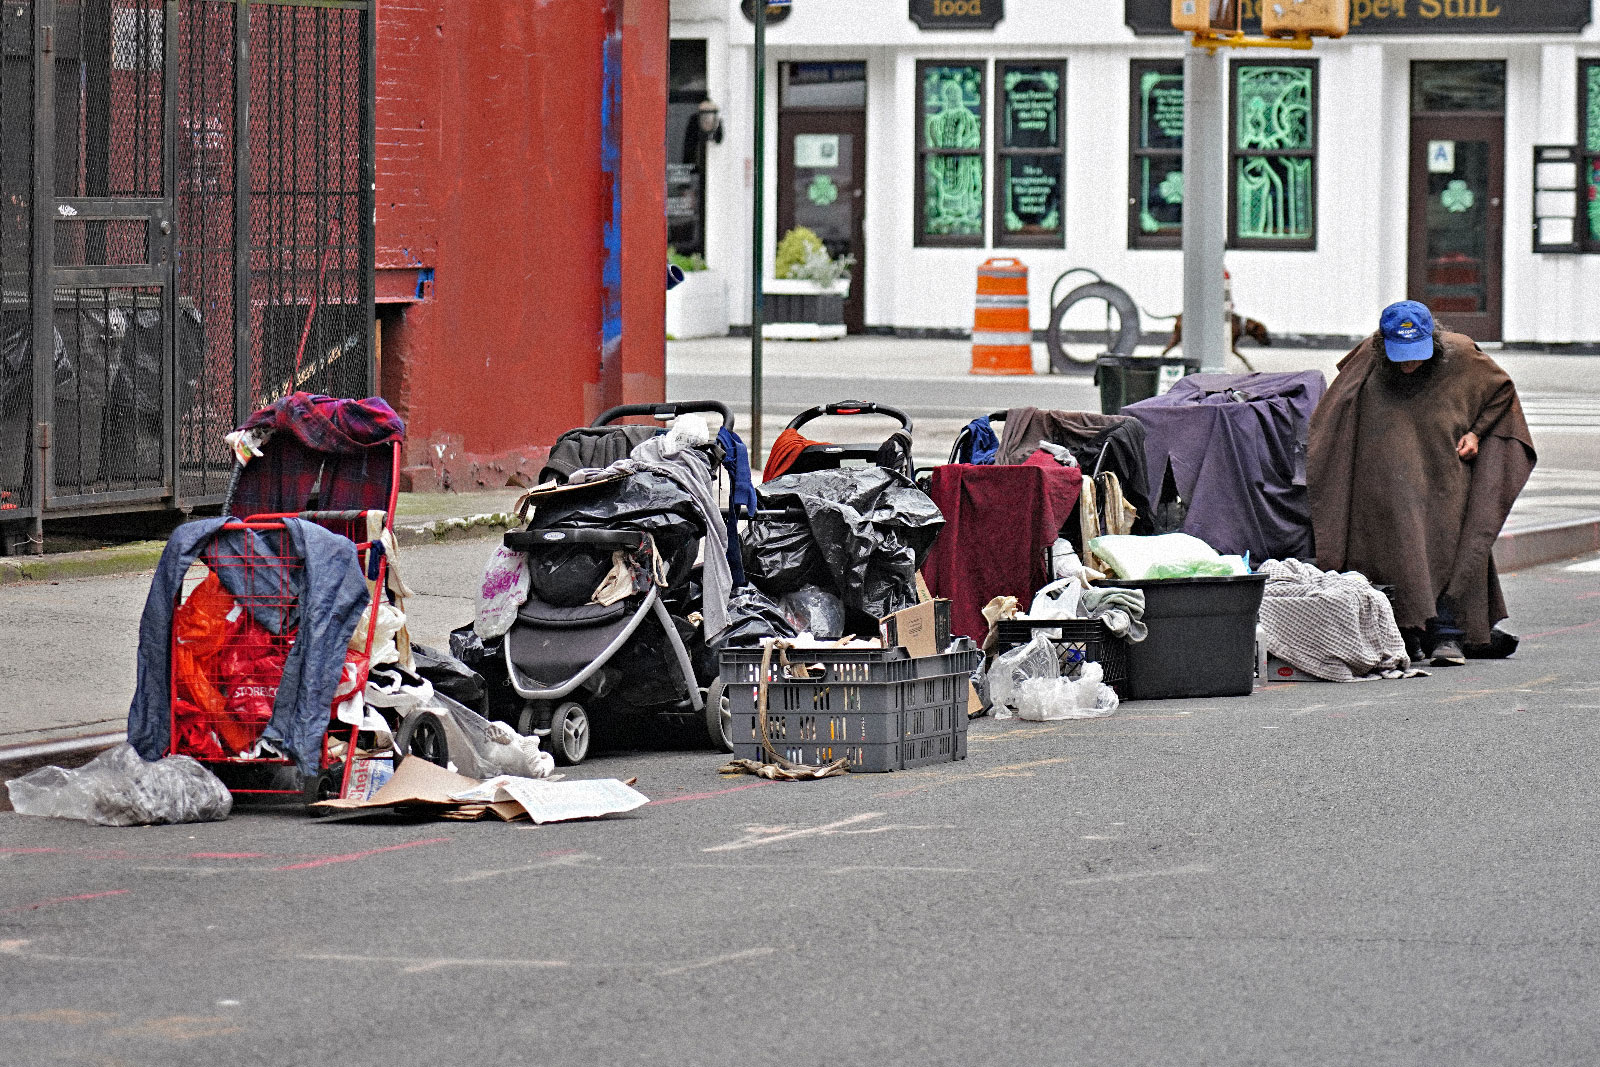 A homeless person sitting with their belongings on the street in New York City.